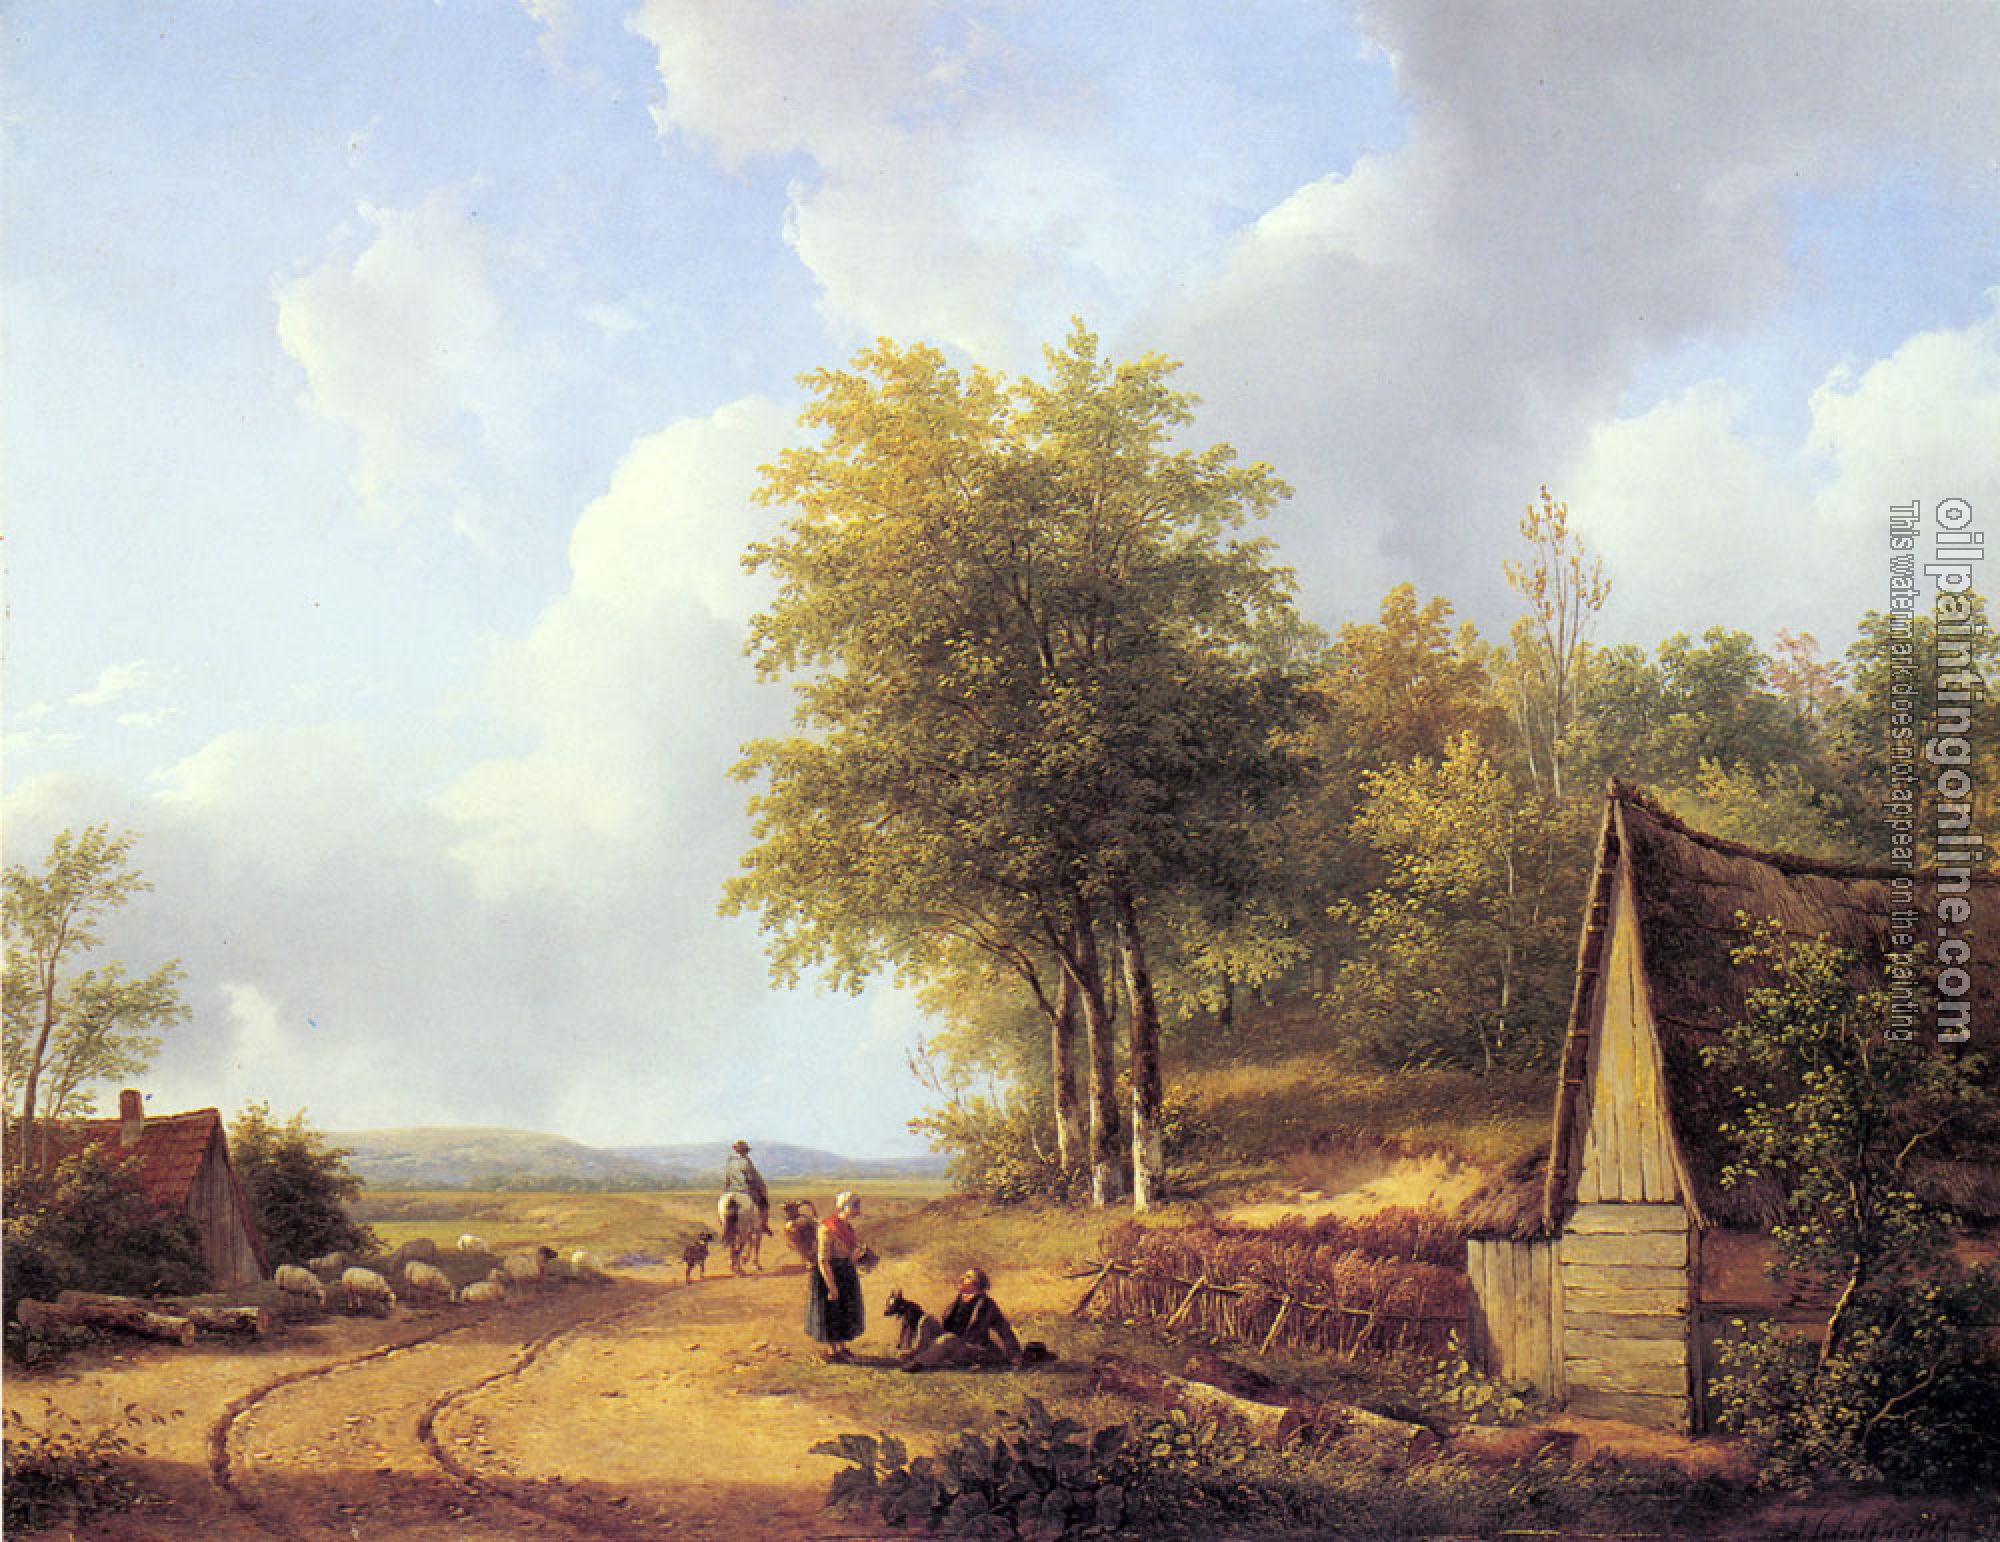 Schelfhout, Andreas - The Country Road